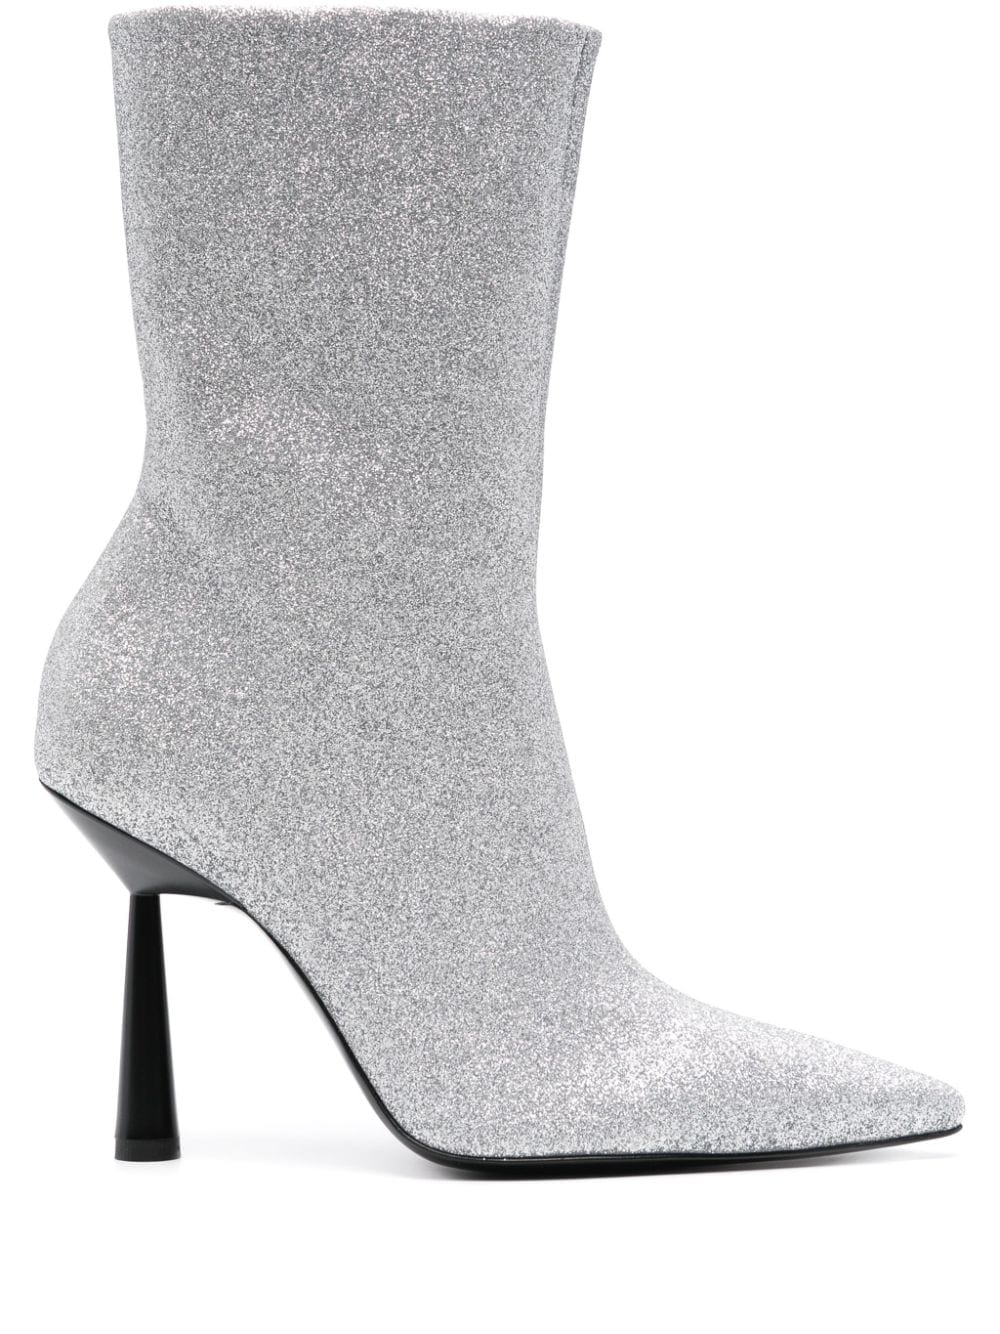 GIABORGHINI Rosie 100mm glittered ankle boots Silver